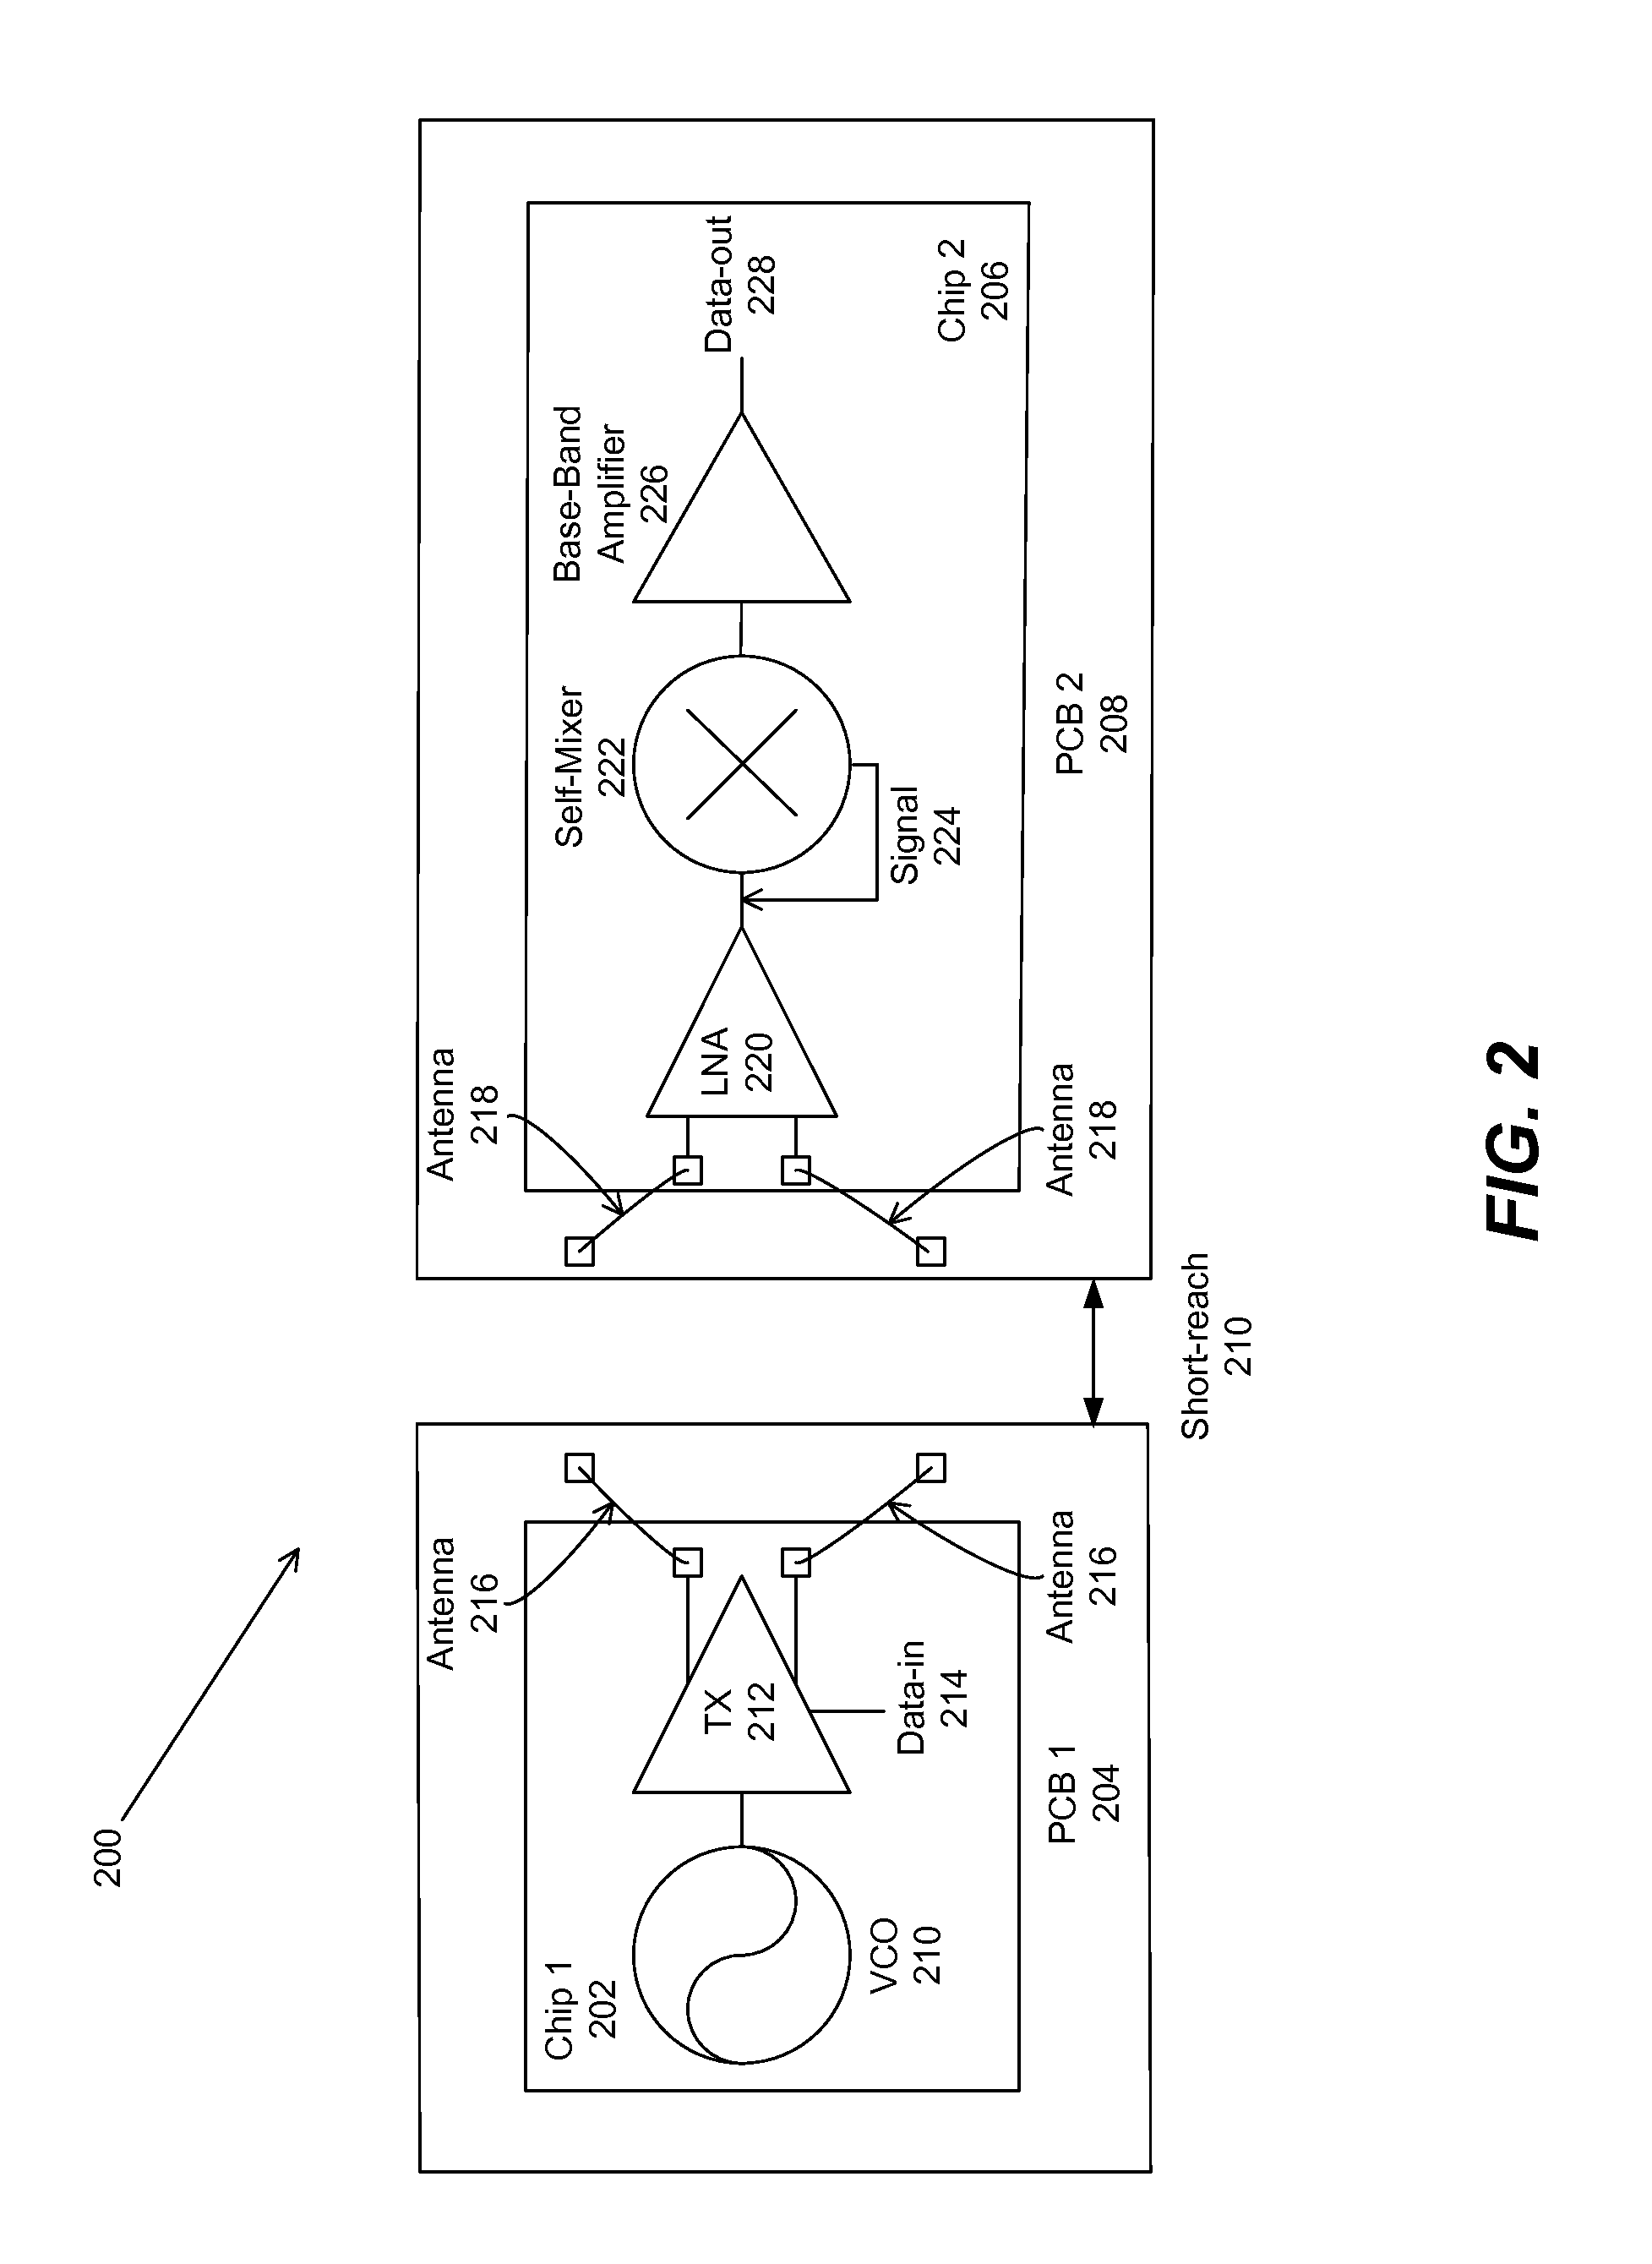 Milli-meter-wave-wireless-interconnect (m2w2-interconnect)method for short-range communications with ultra-high data rate capability